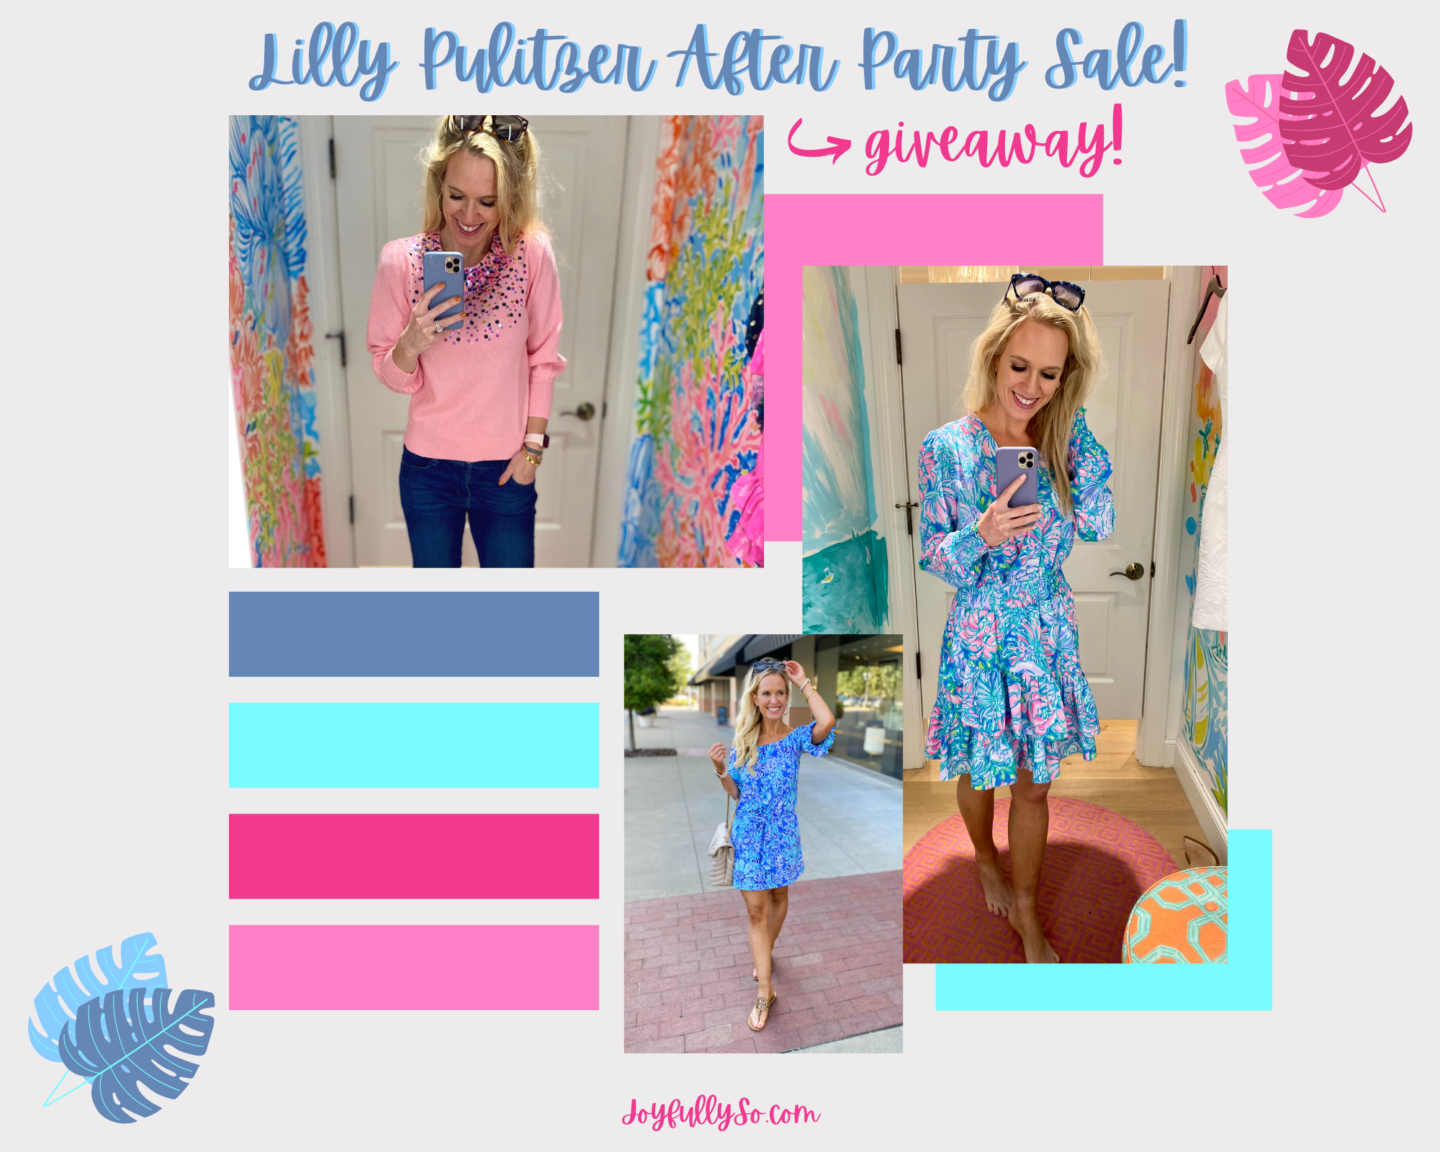 lilly pulitzer after party sale giveaway